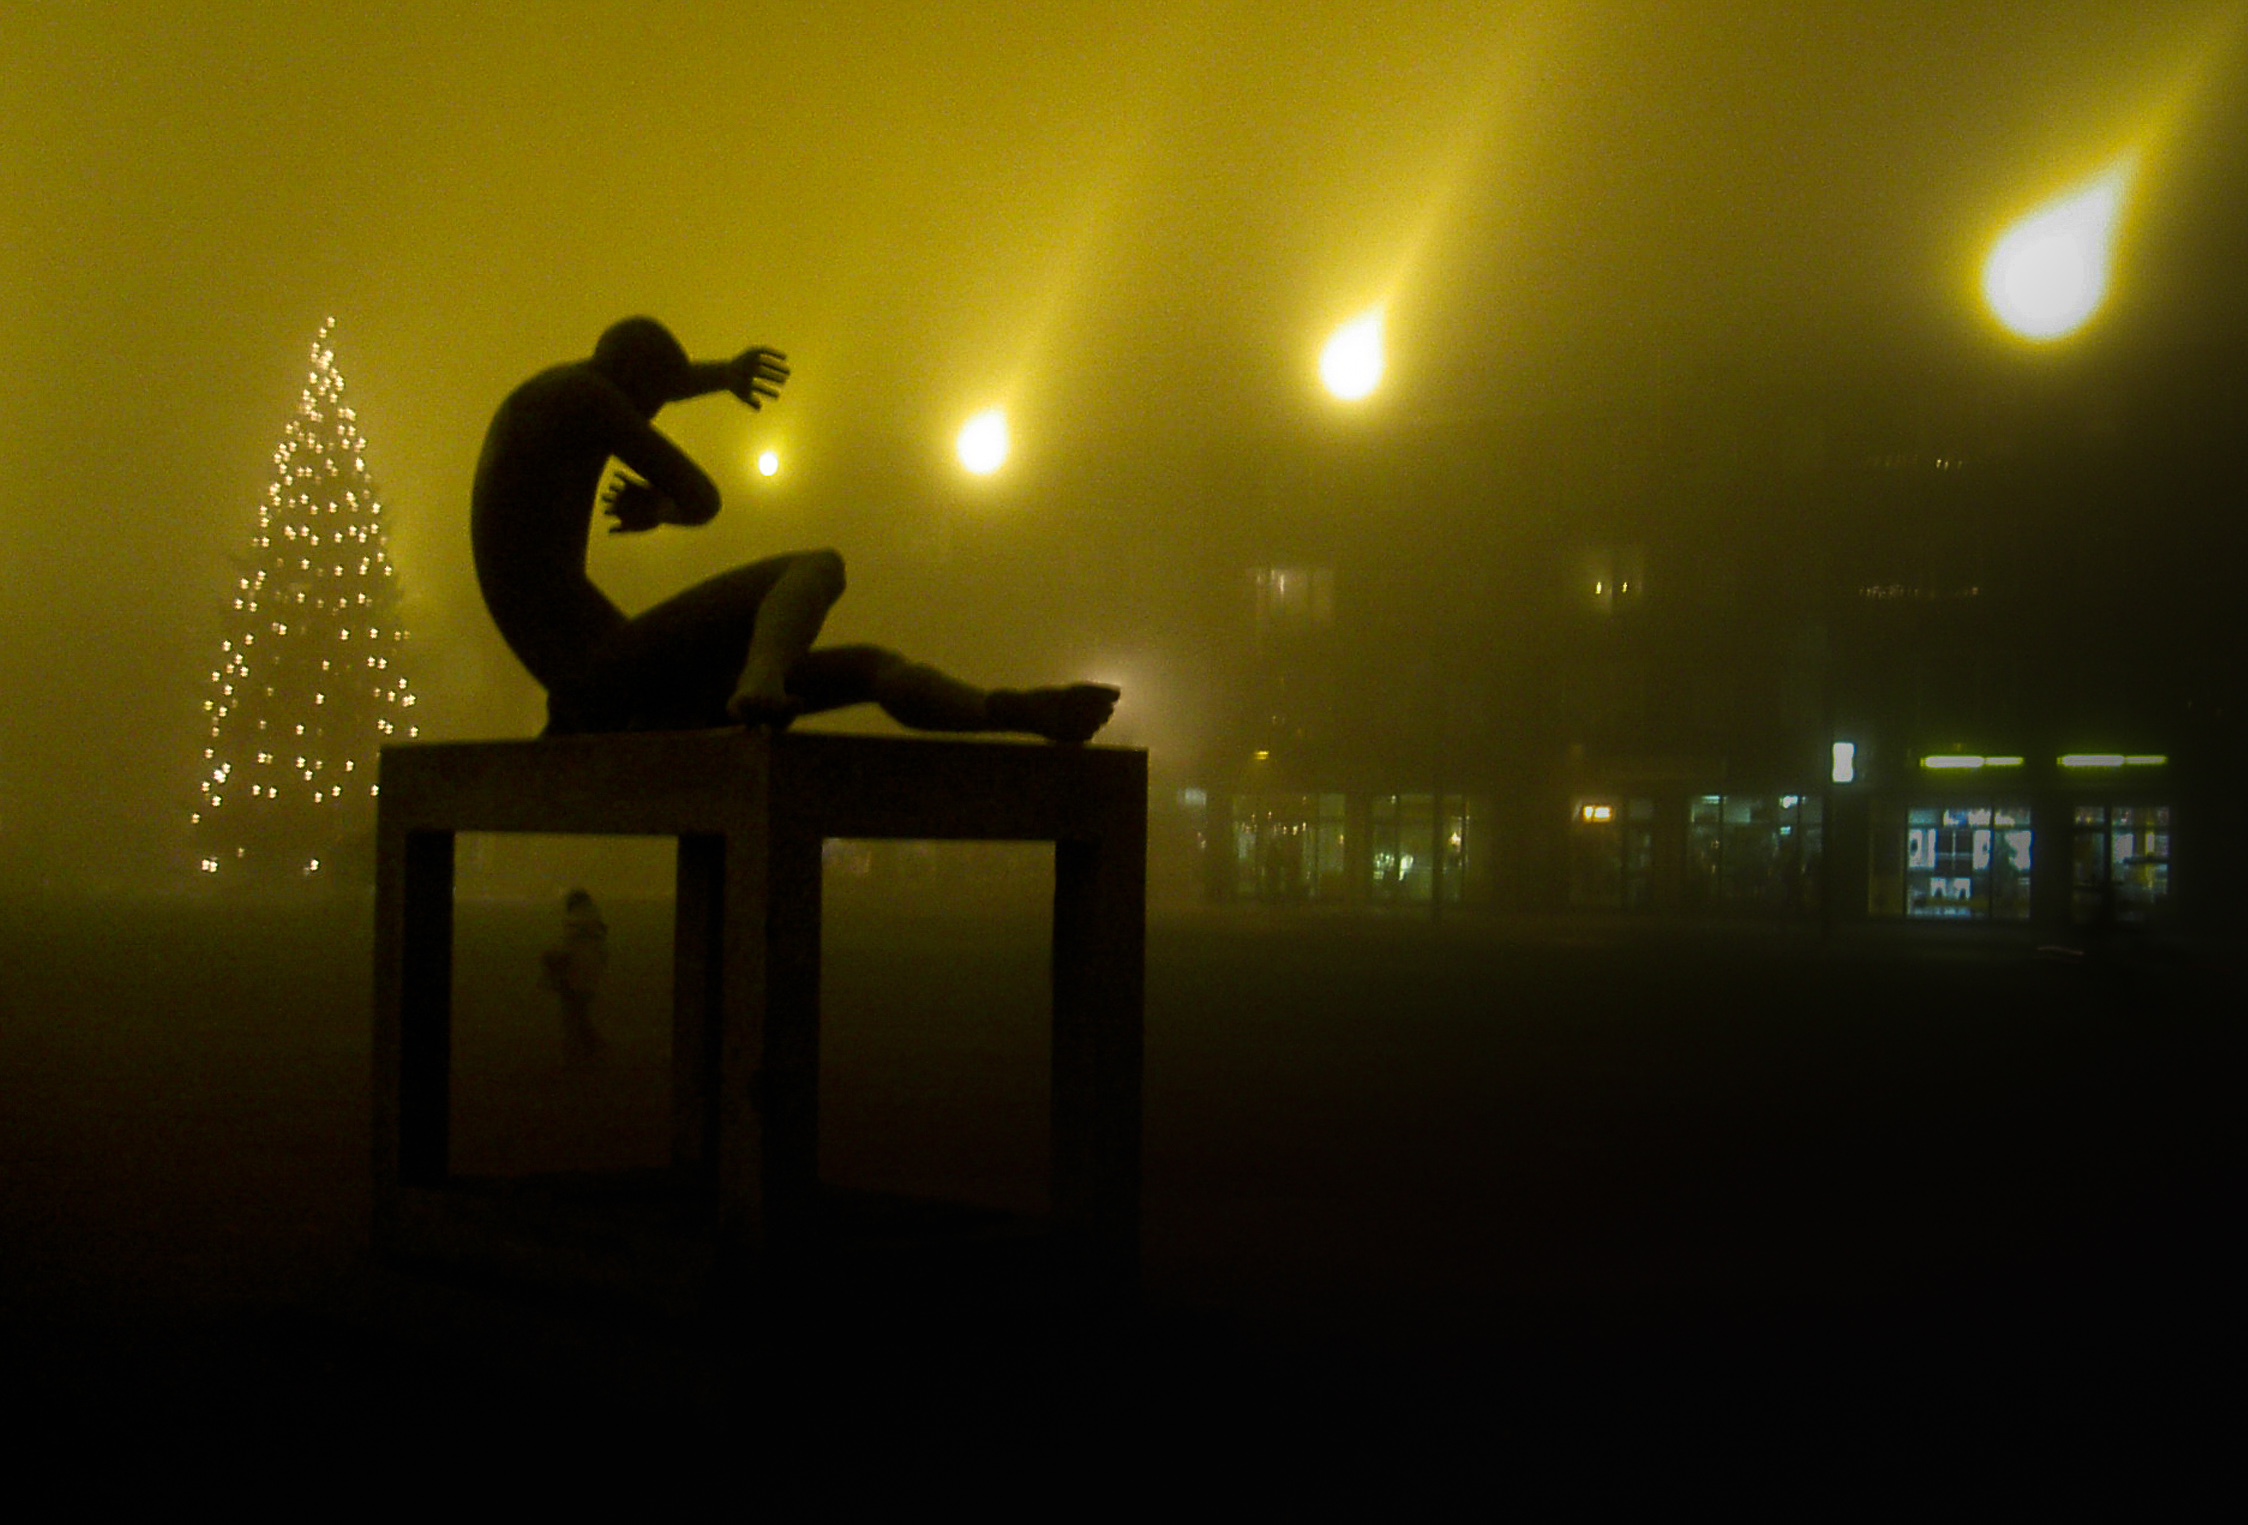 Night photo of a statue silhouette giving the impression to protect itself with its arms of luminous spots